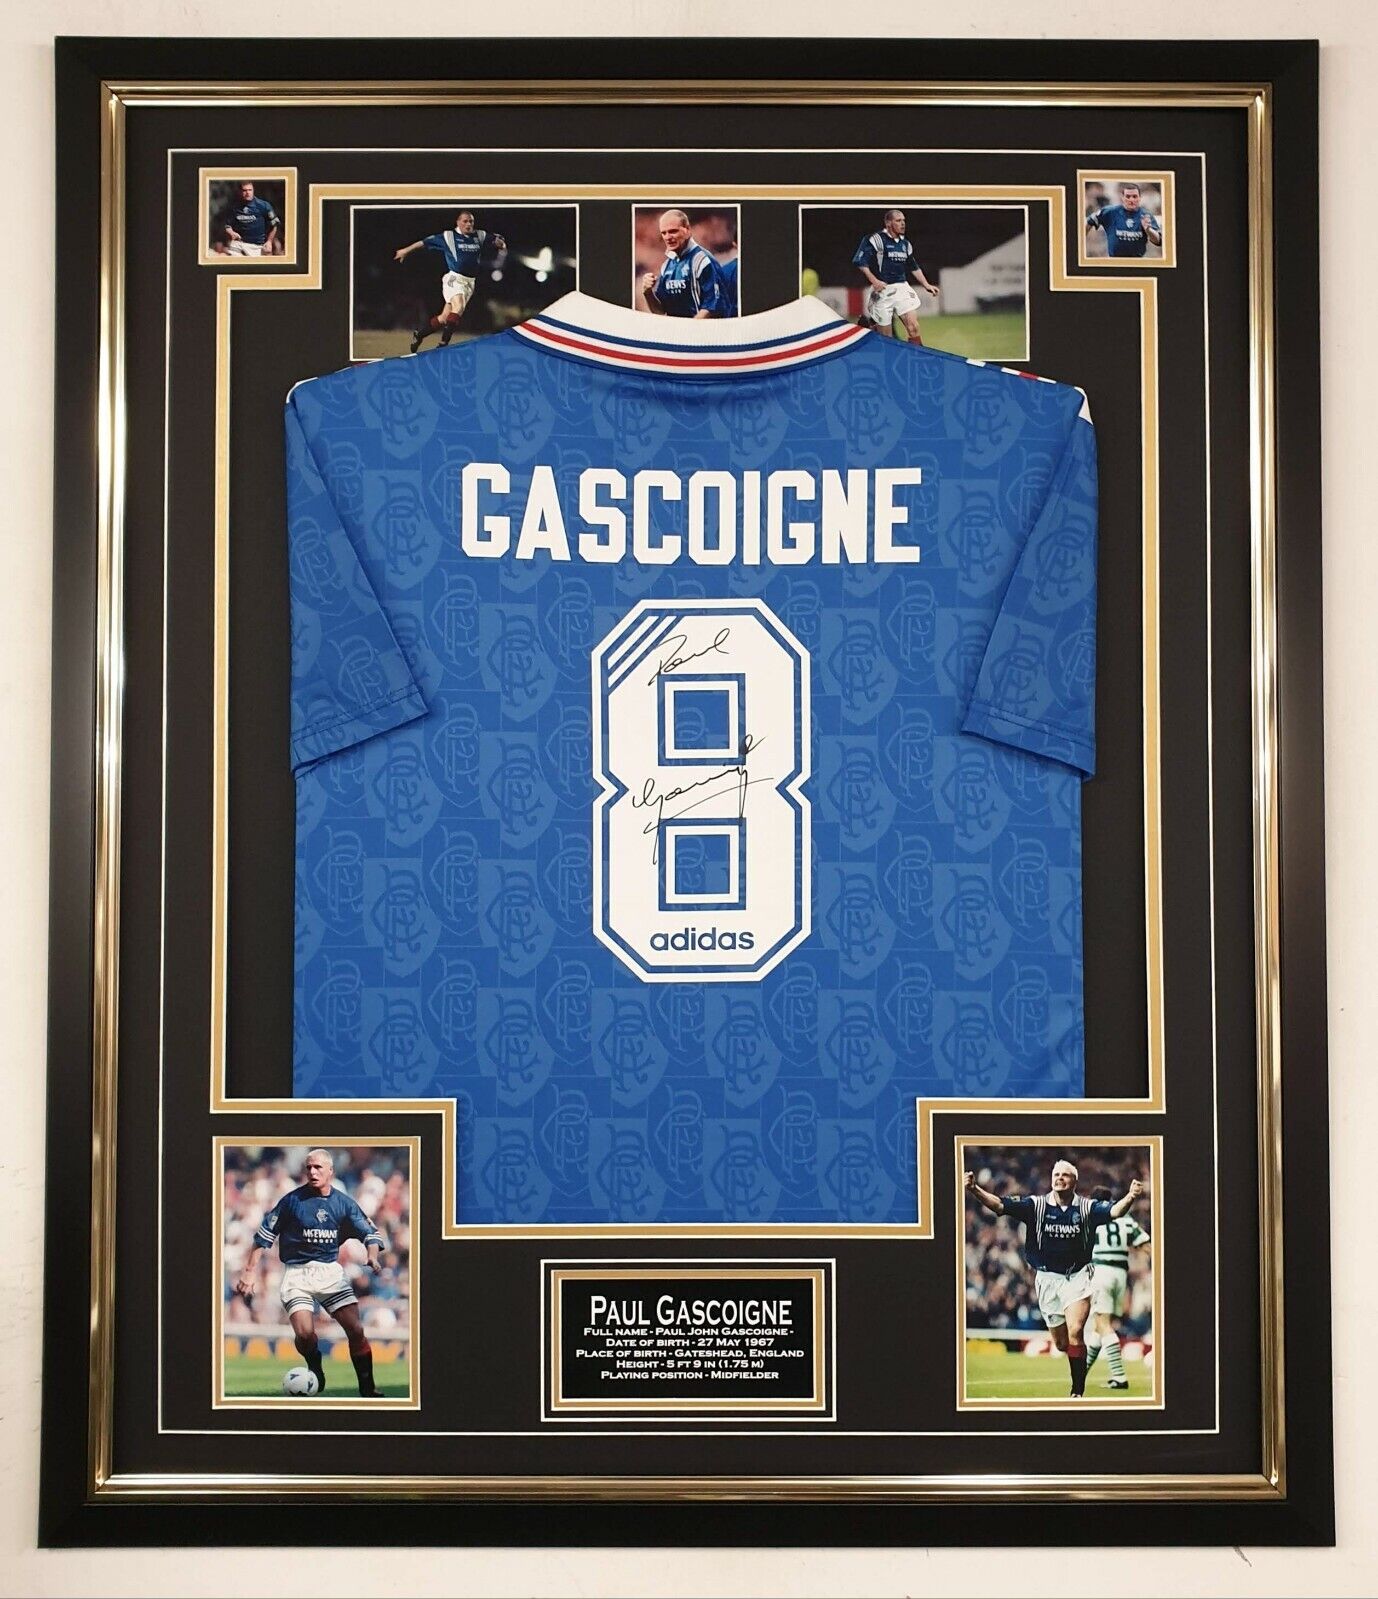 Paul Gascoigne of Rangers Signed Shirt 9 in a Row Display